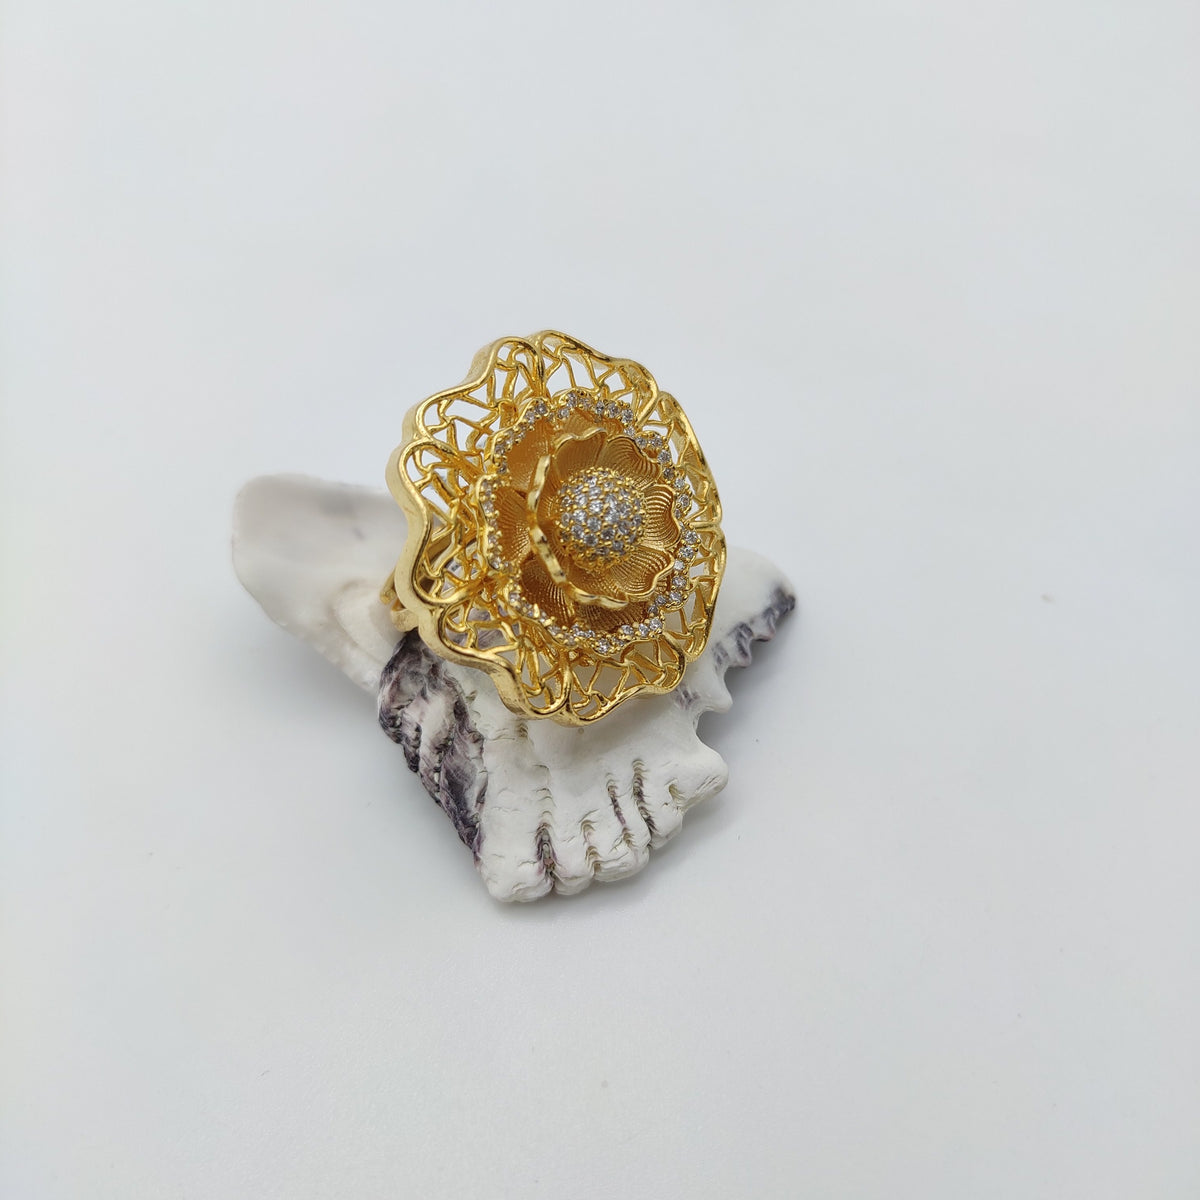 GOLD PLATED RING WITH 3D FLOWER SHAPE AND CZ DIAMOND SETTING